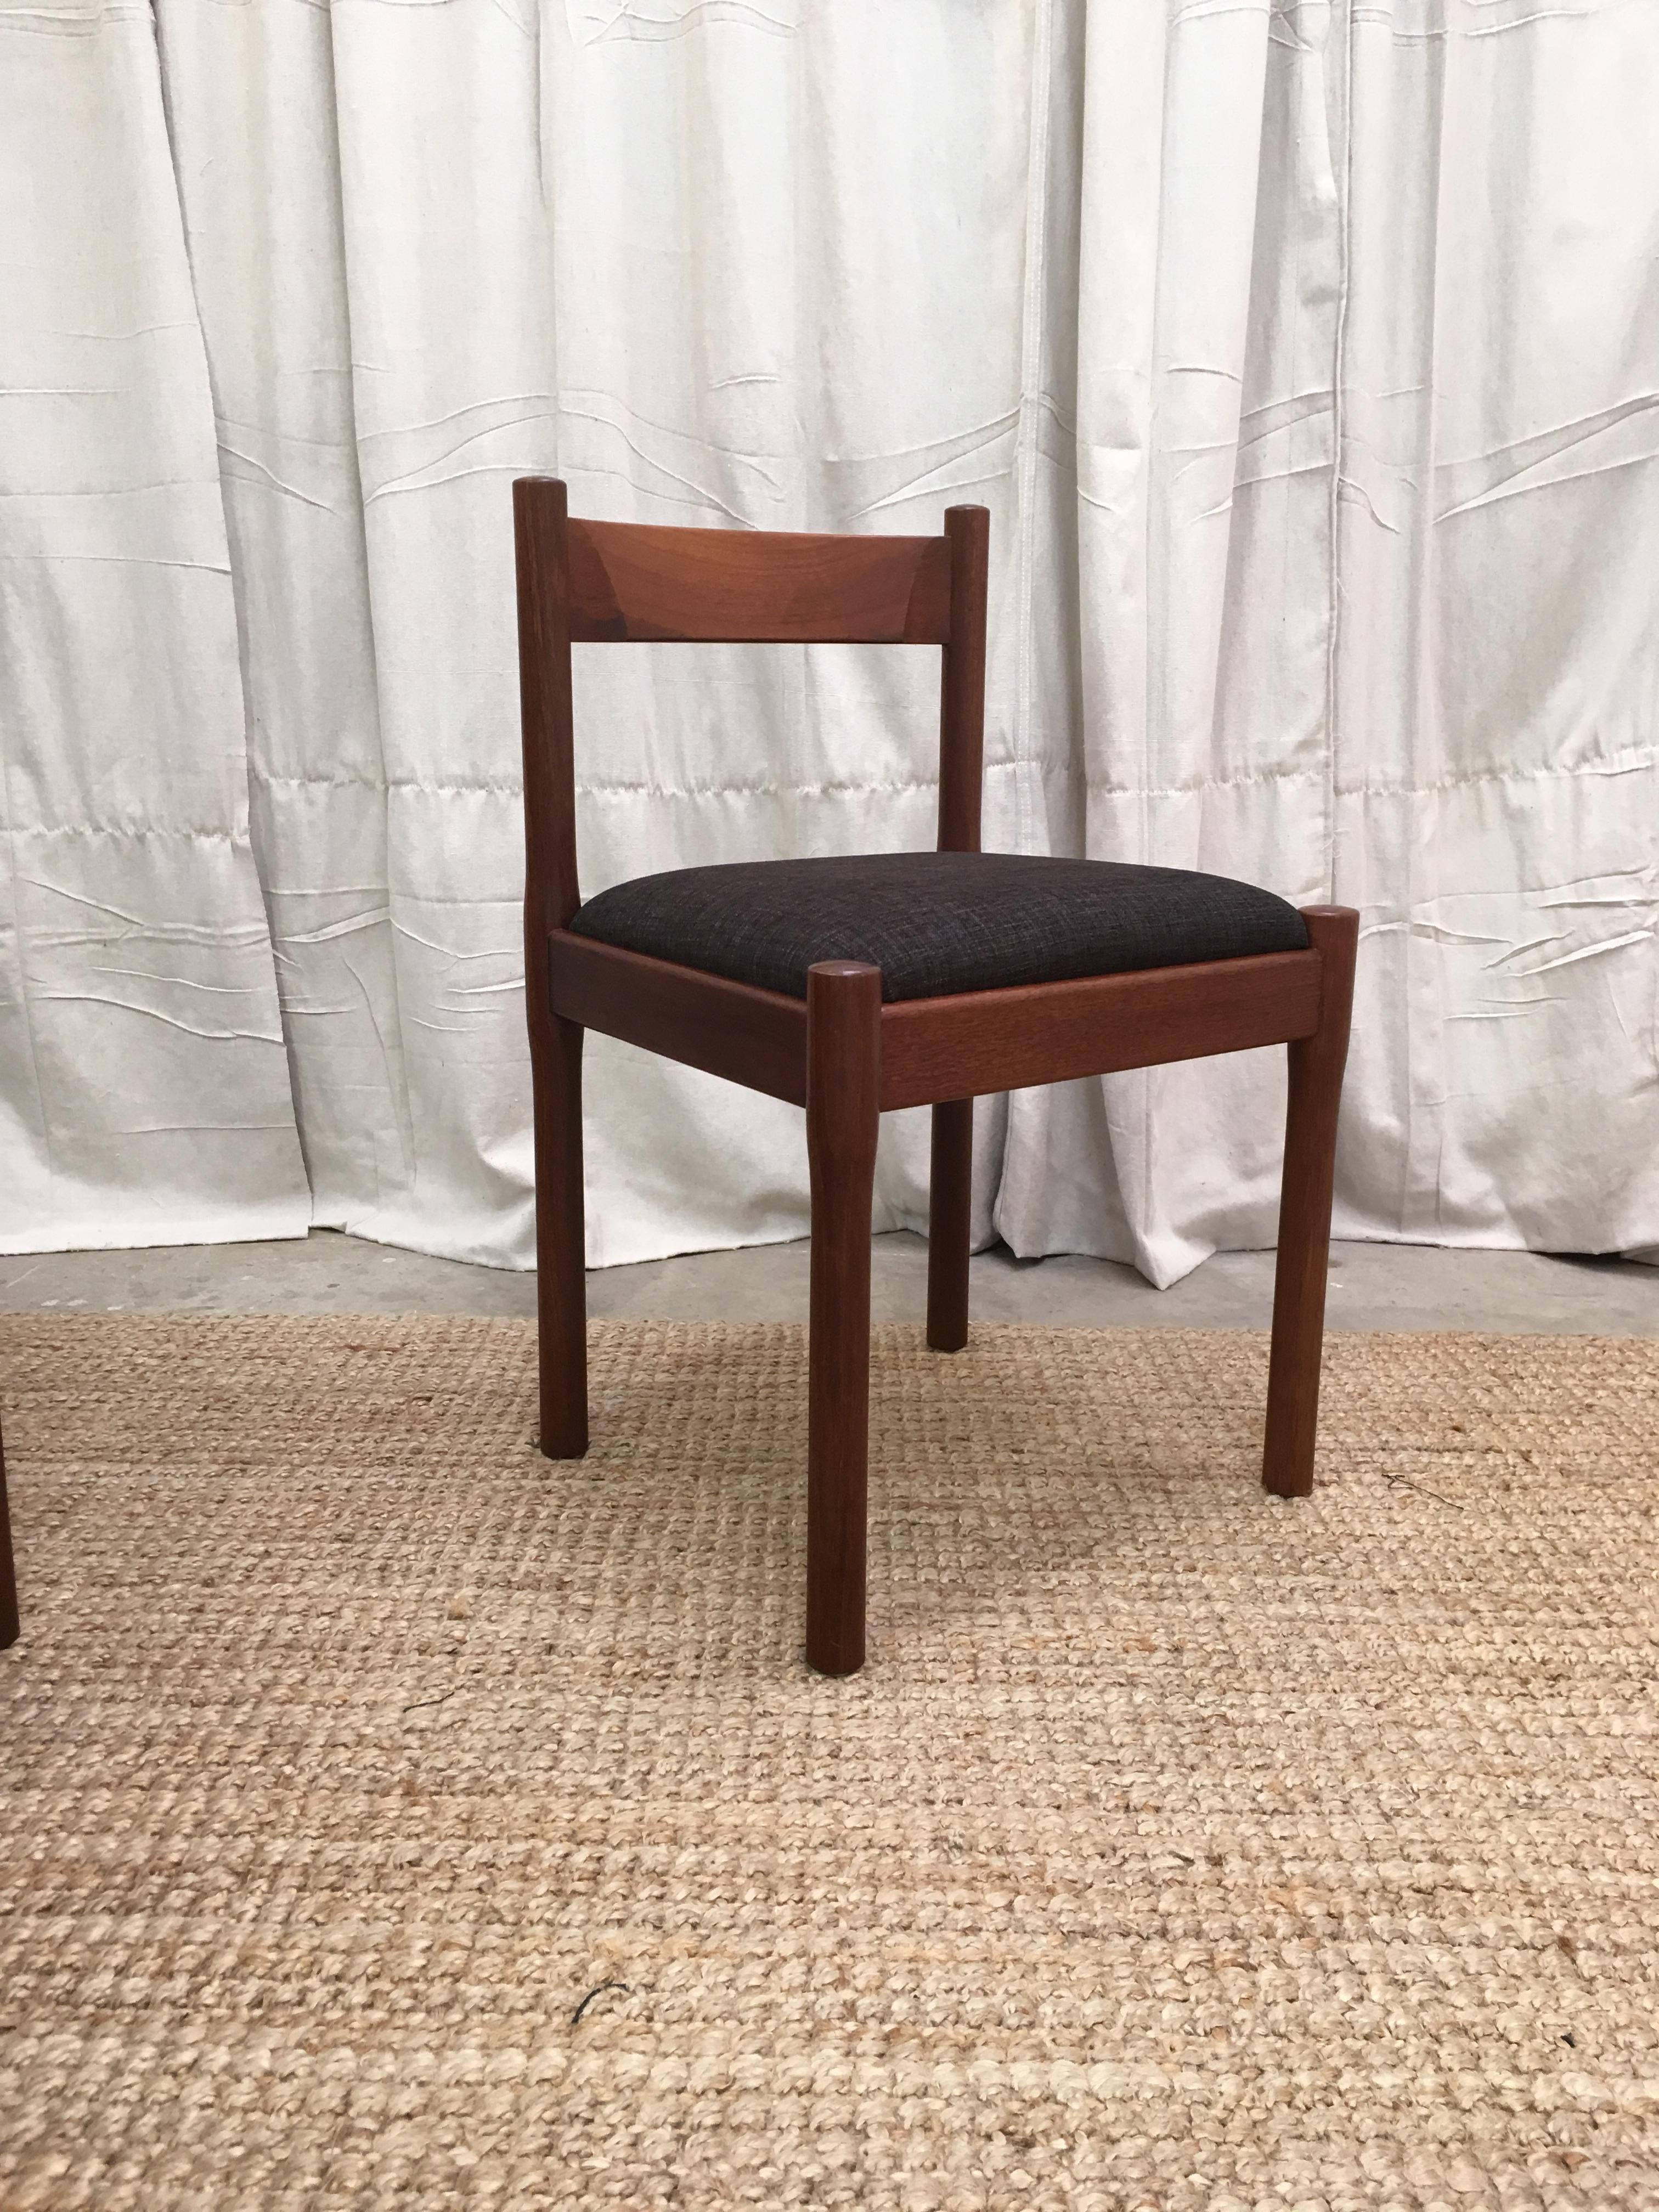 Mid-Century Modern 6 Carimate Chairs Magistretti , Copies by CATT Furniture, 1967 In Jarrah Timber